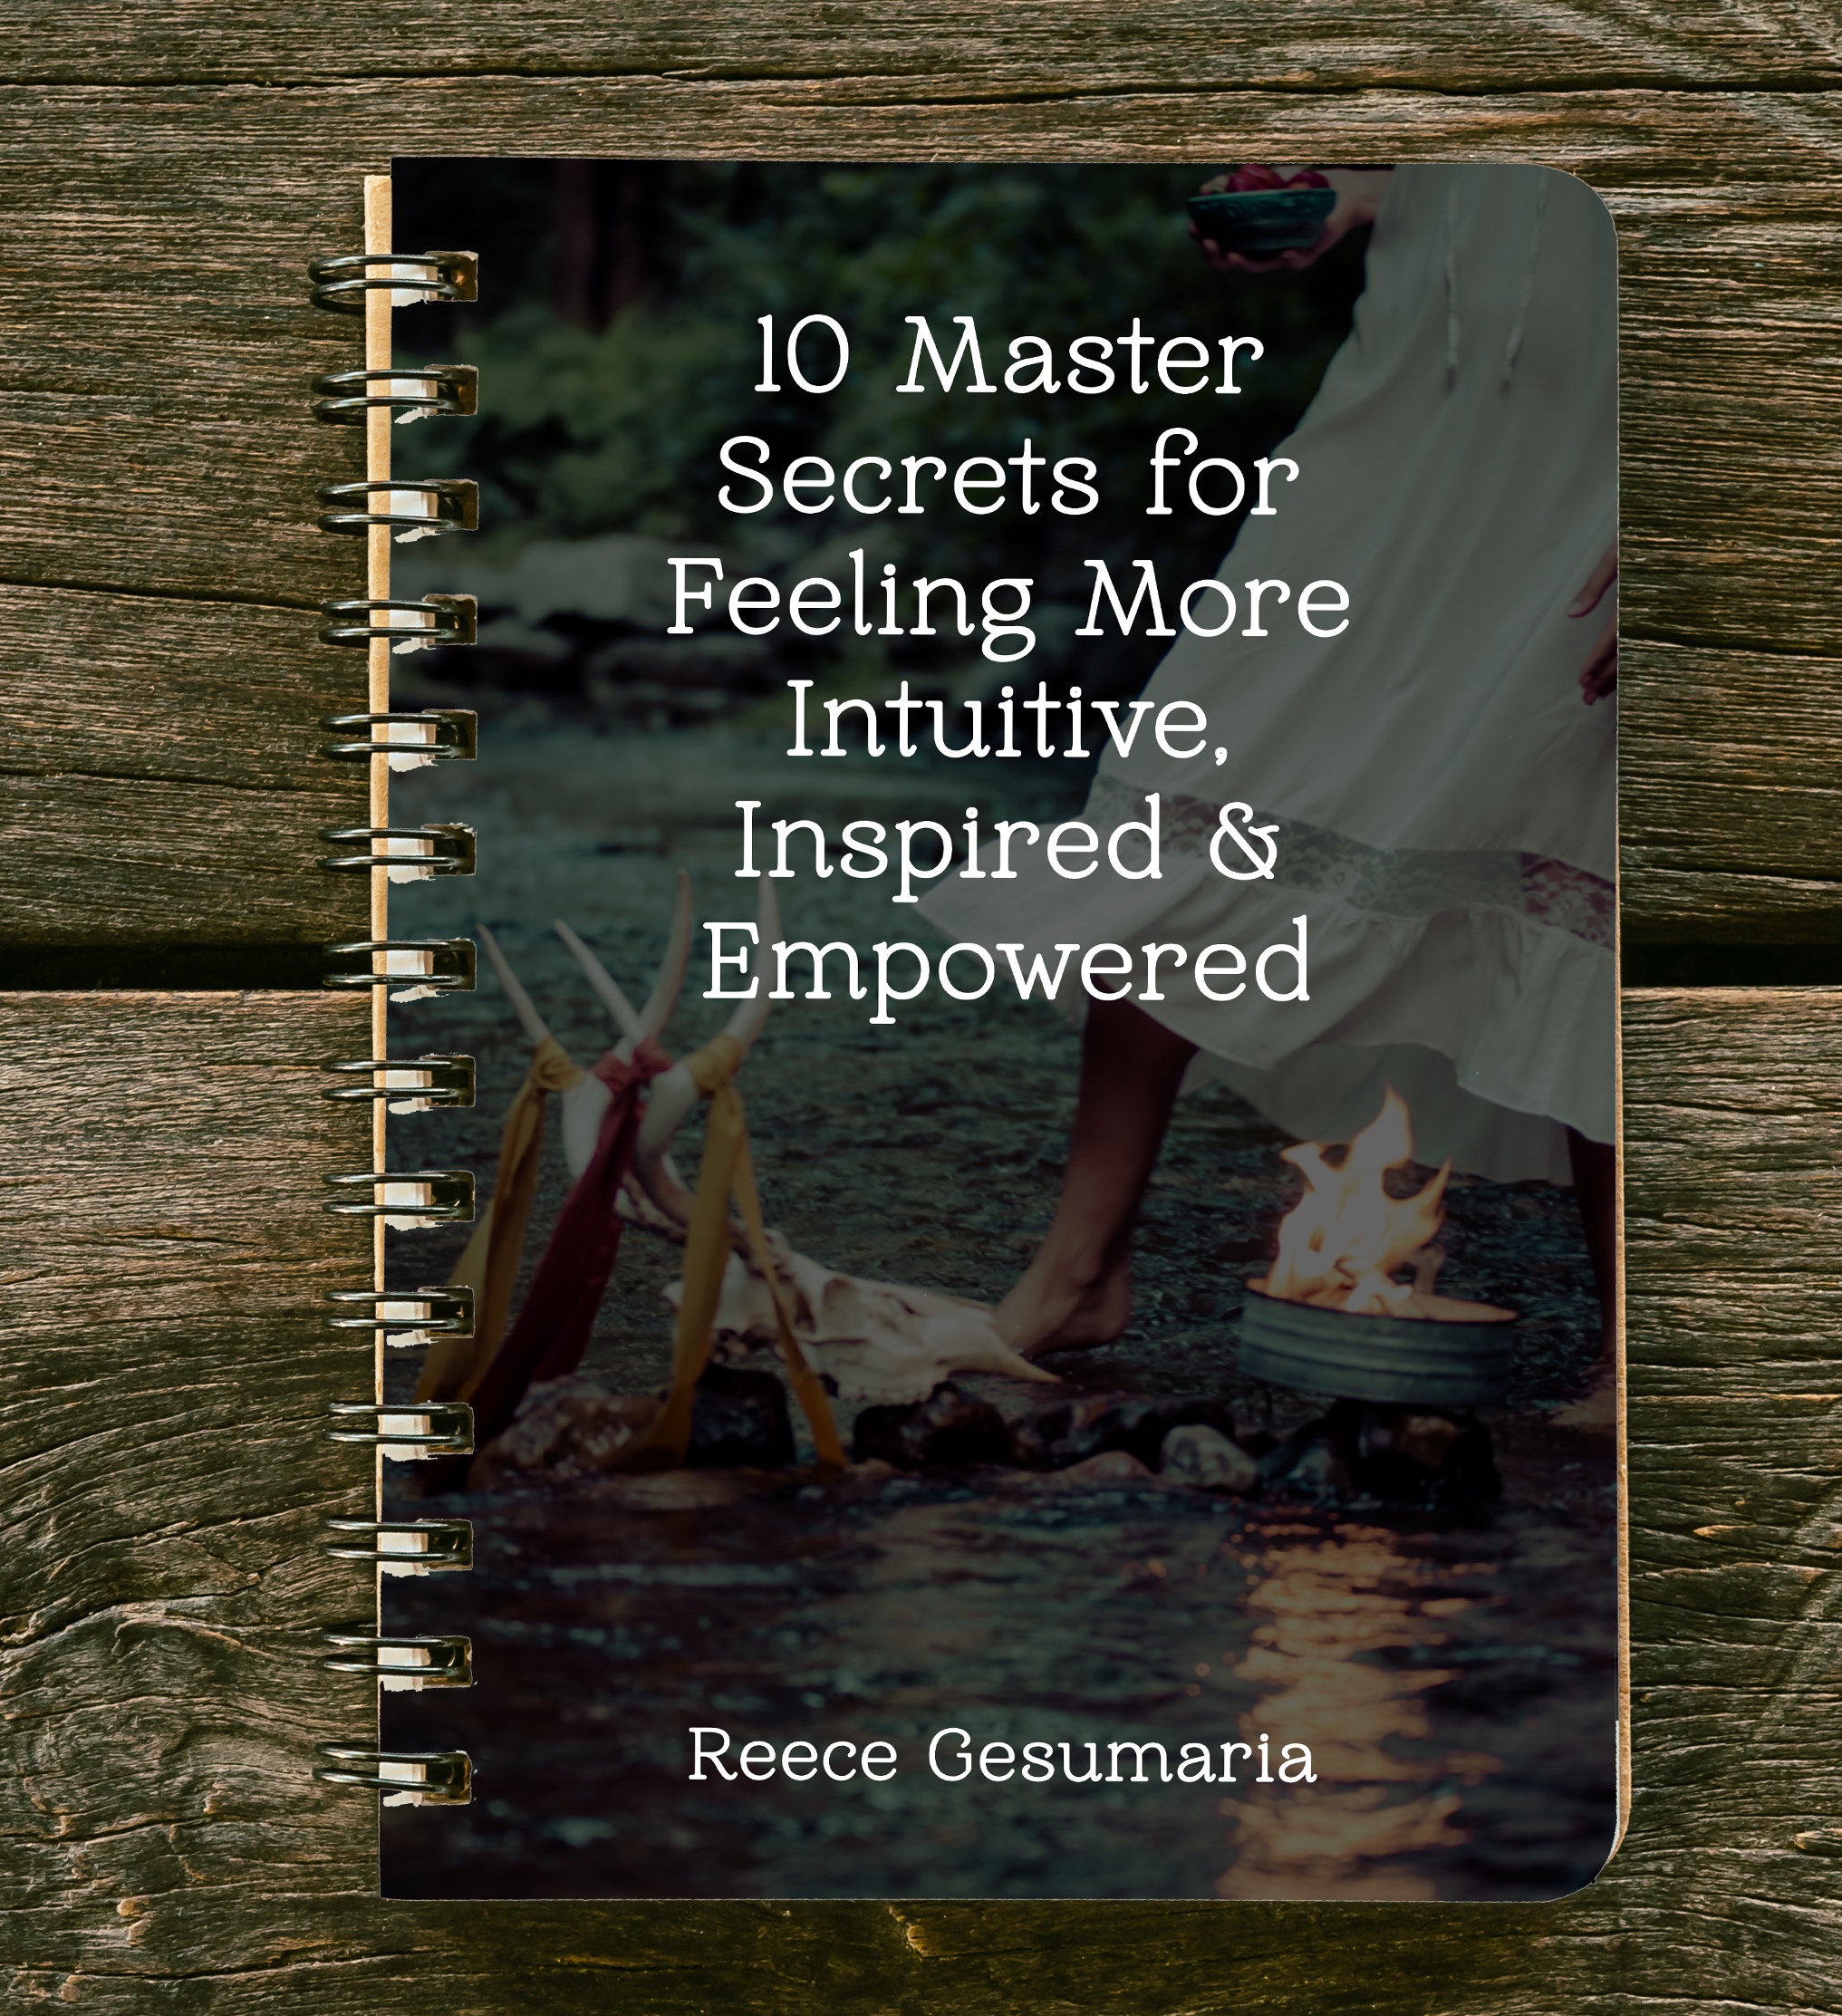 10 Master Secrets For Feeling More Inspired and Empowered Book Cover